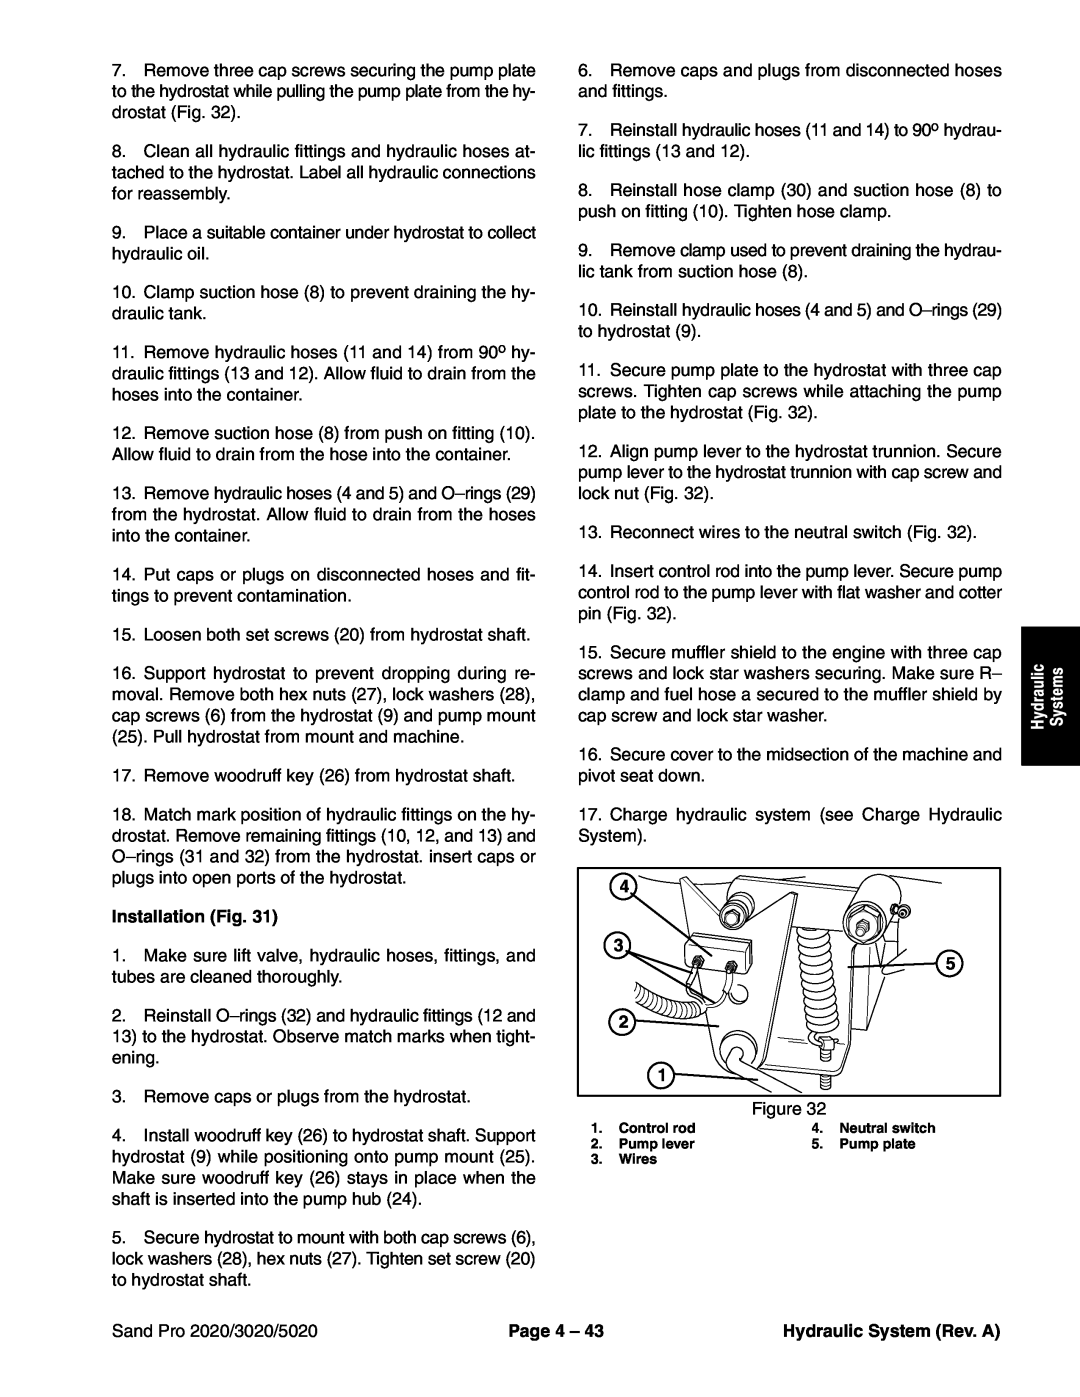 Toro service manual Installation Fig, Systems, Sand Pro 2020/3020/5020, Page 4, Hydraulic System Rev. A 